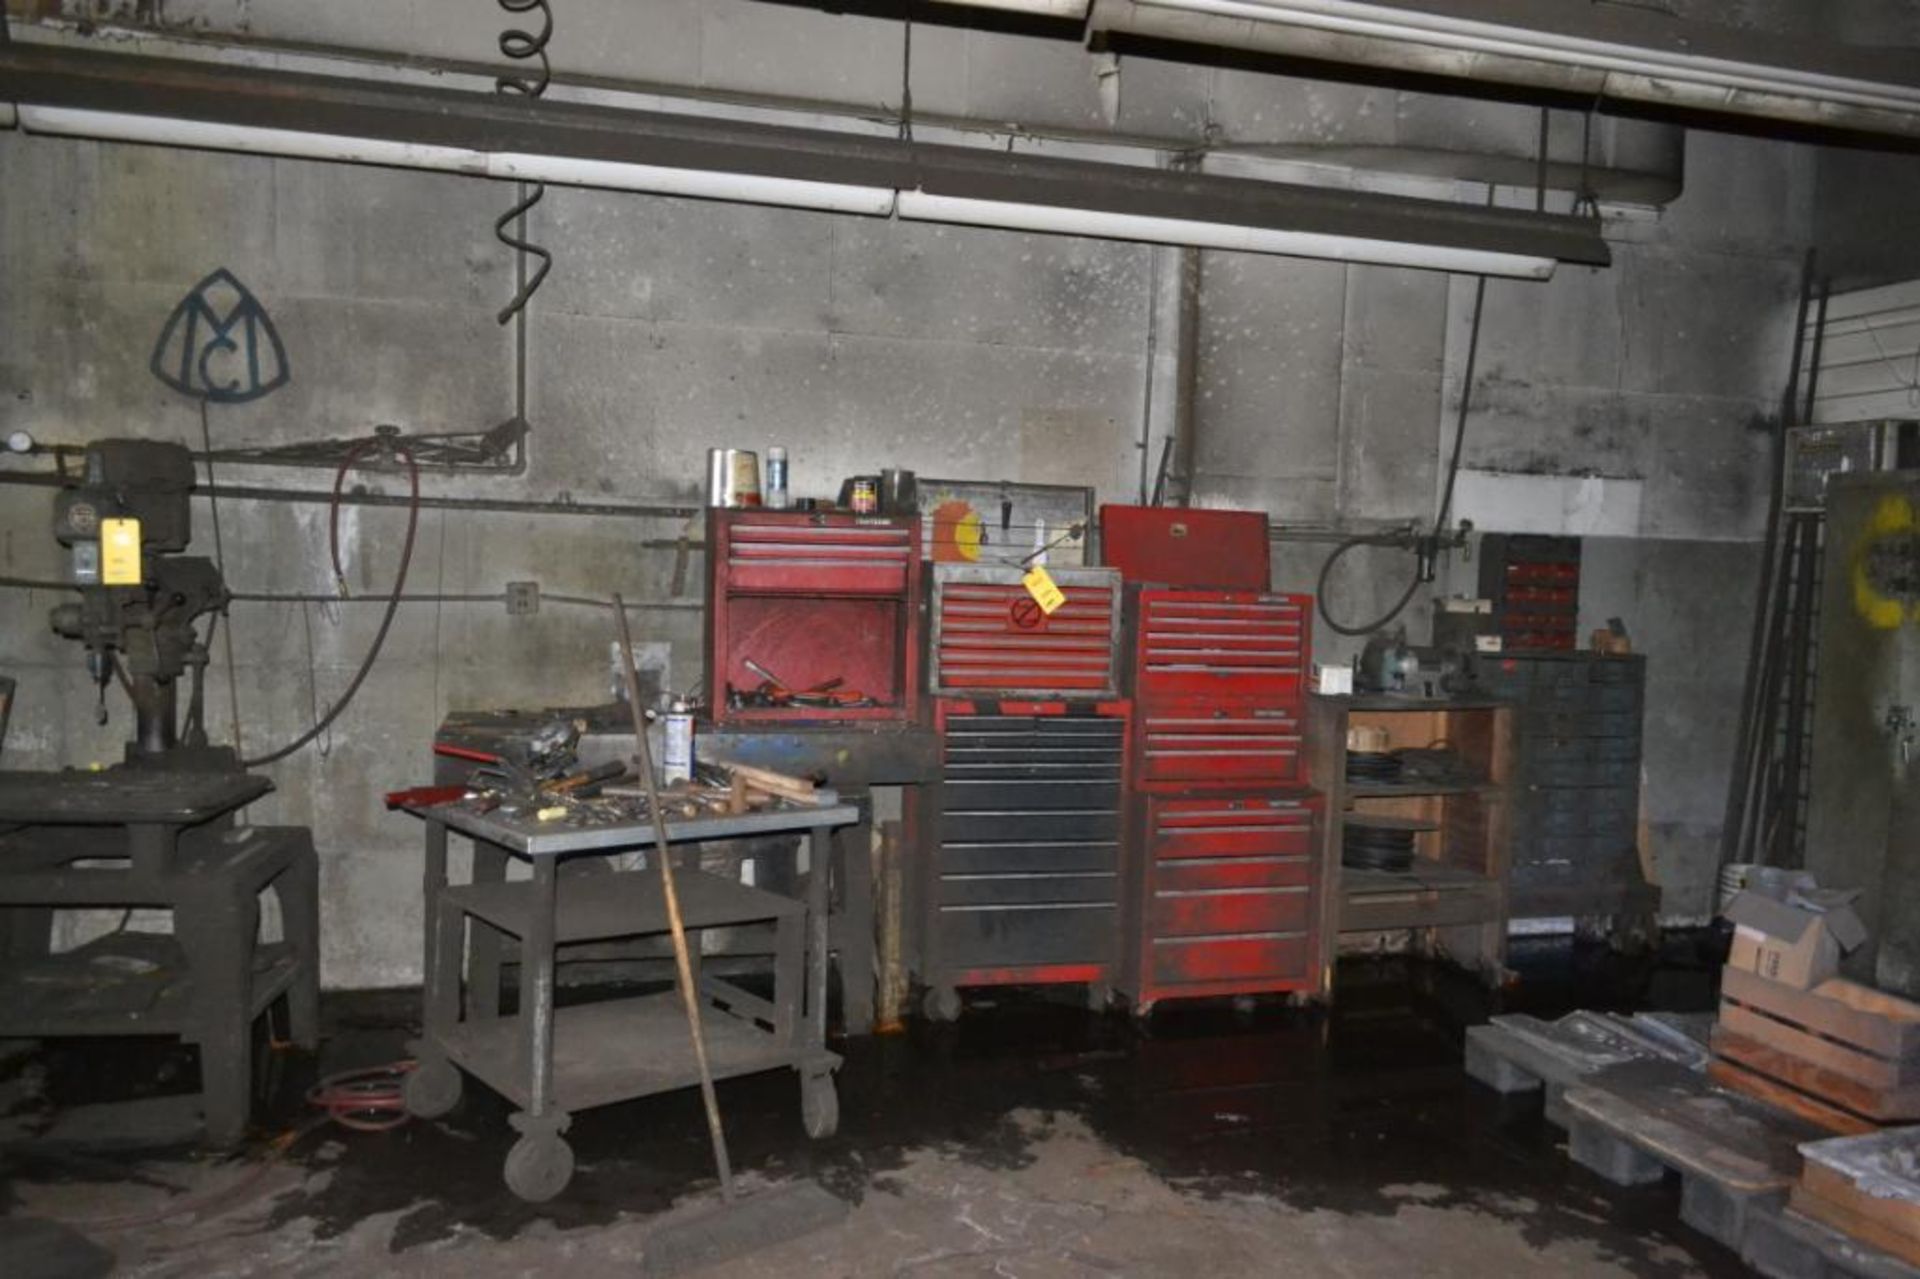 LOT: Remaining Contents of Basement Room including Tool Boxes, Hand Tools, Steel Horses, Furniture - Image 2 of 2